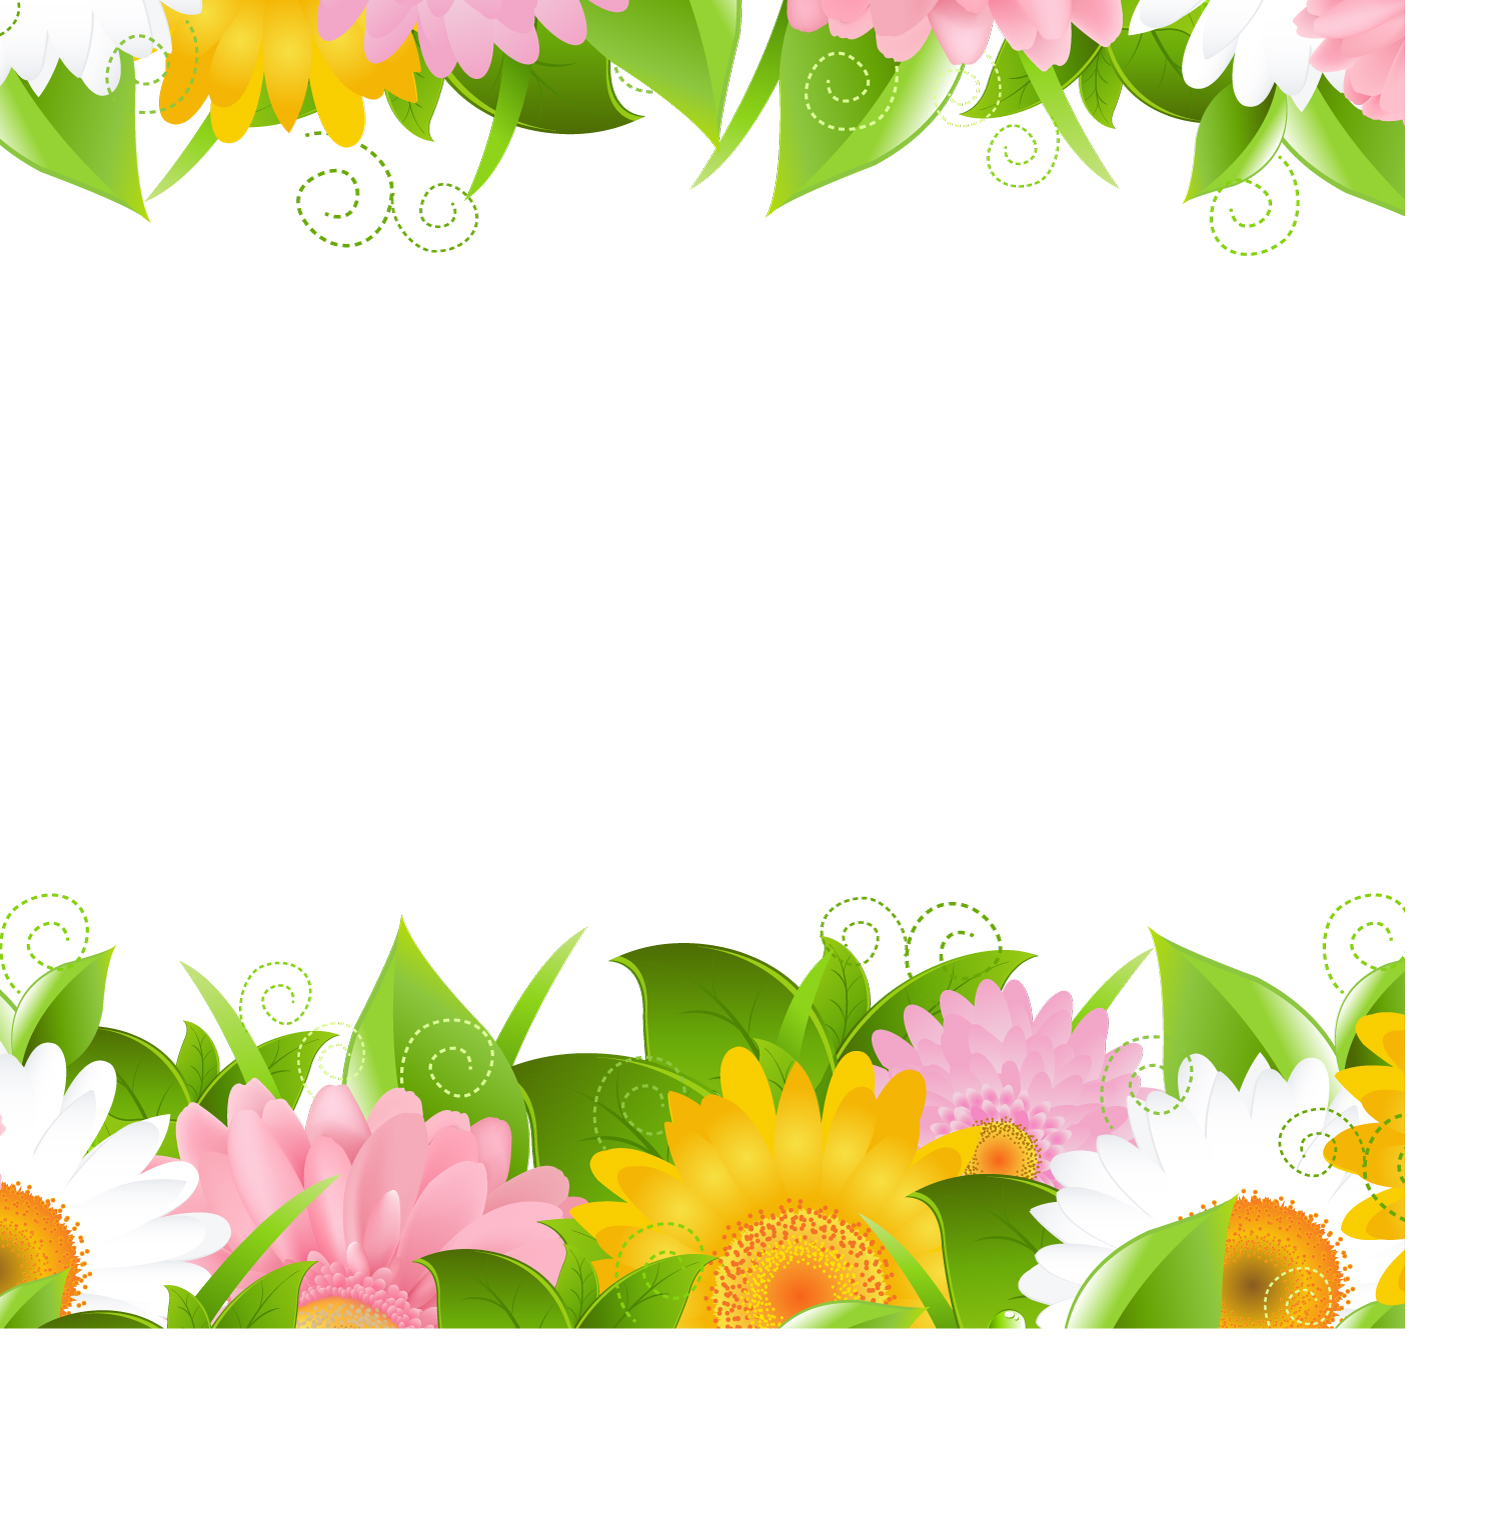 Flowers petals lace background 02 vector Free Vector - ClipArt ...